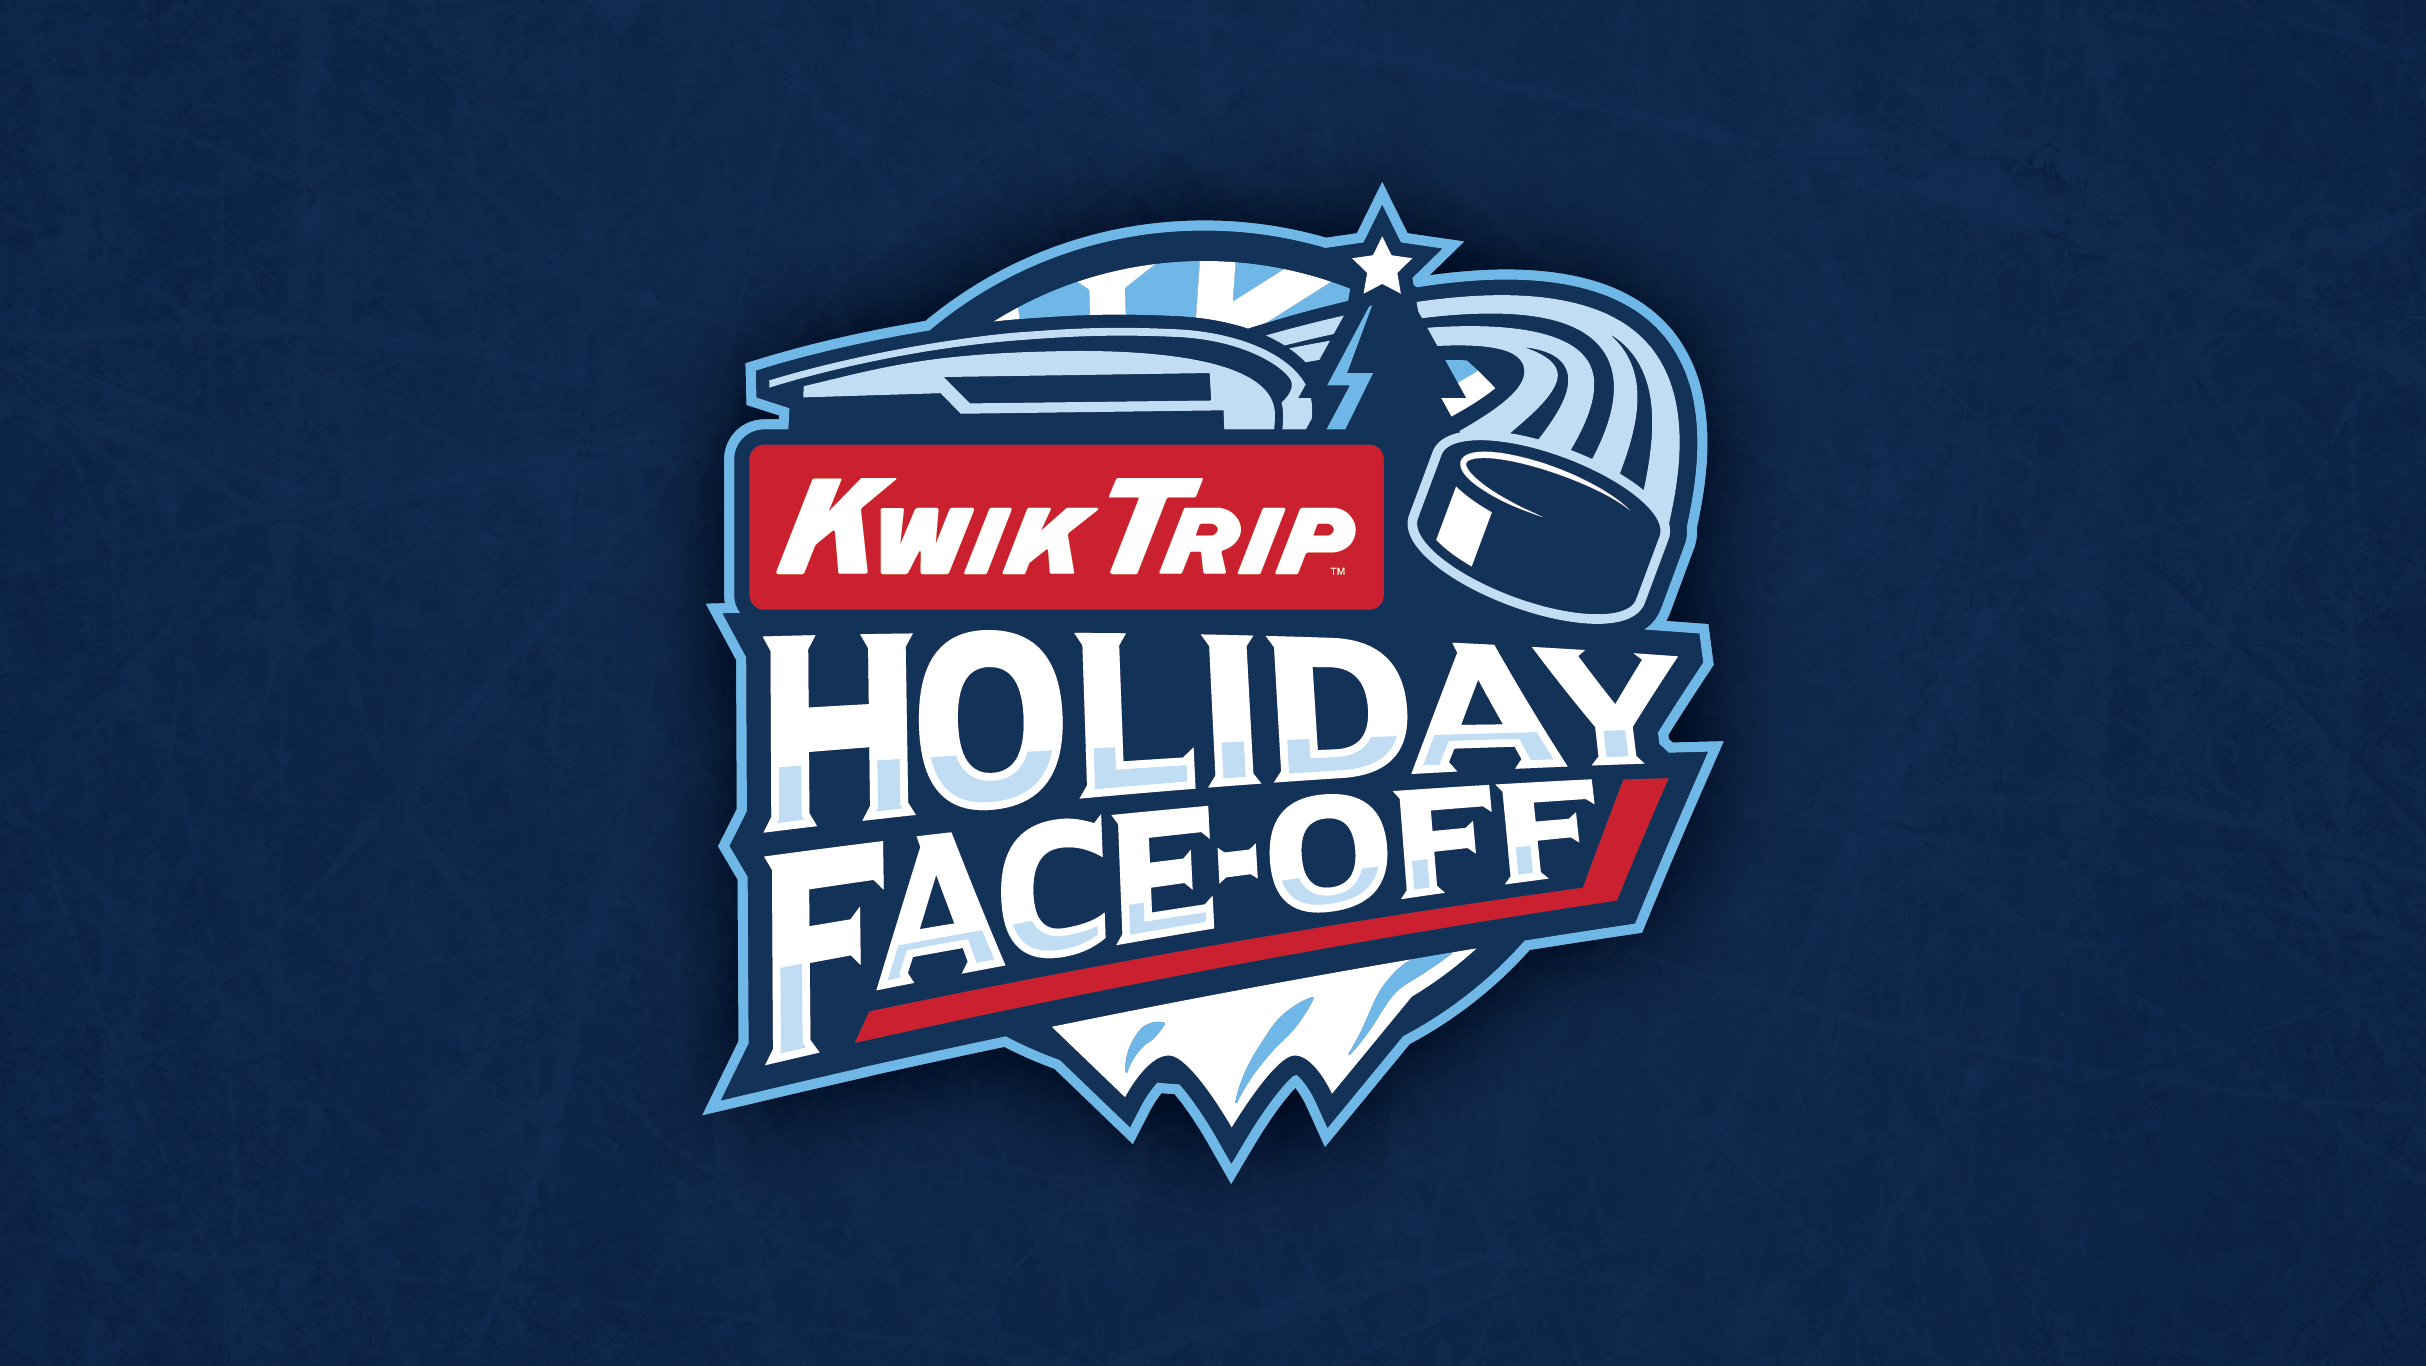 Kwik Trip Holiday Face-Off presale password for advance tickets in Milwaukee